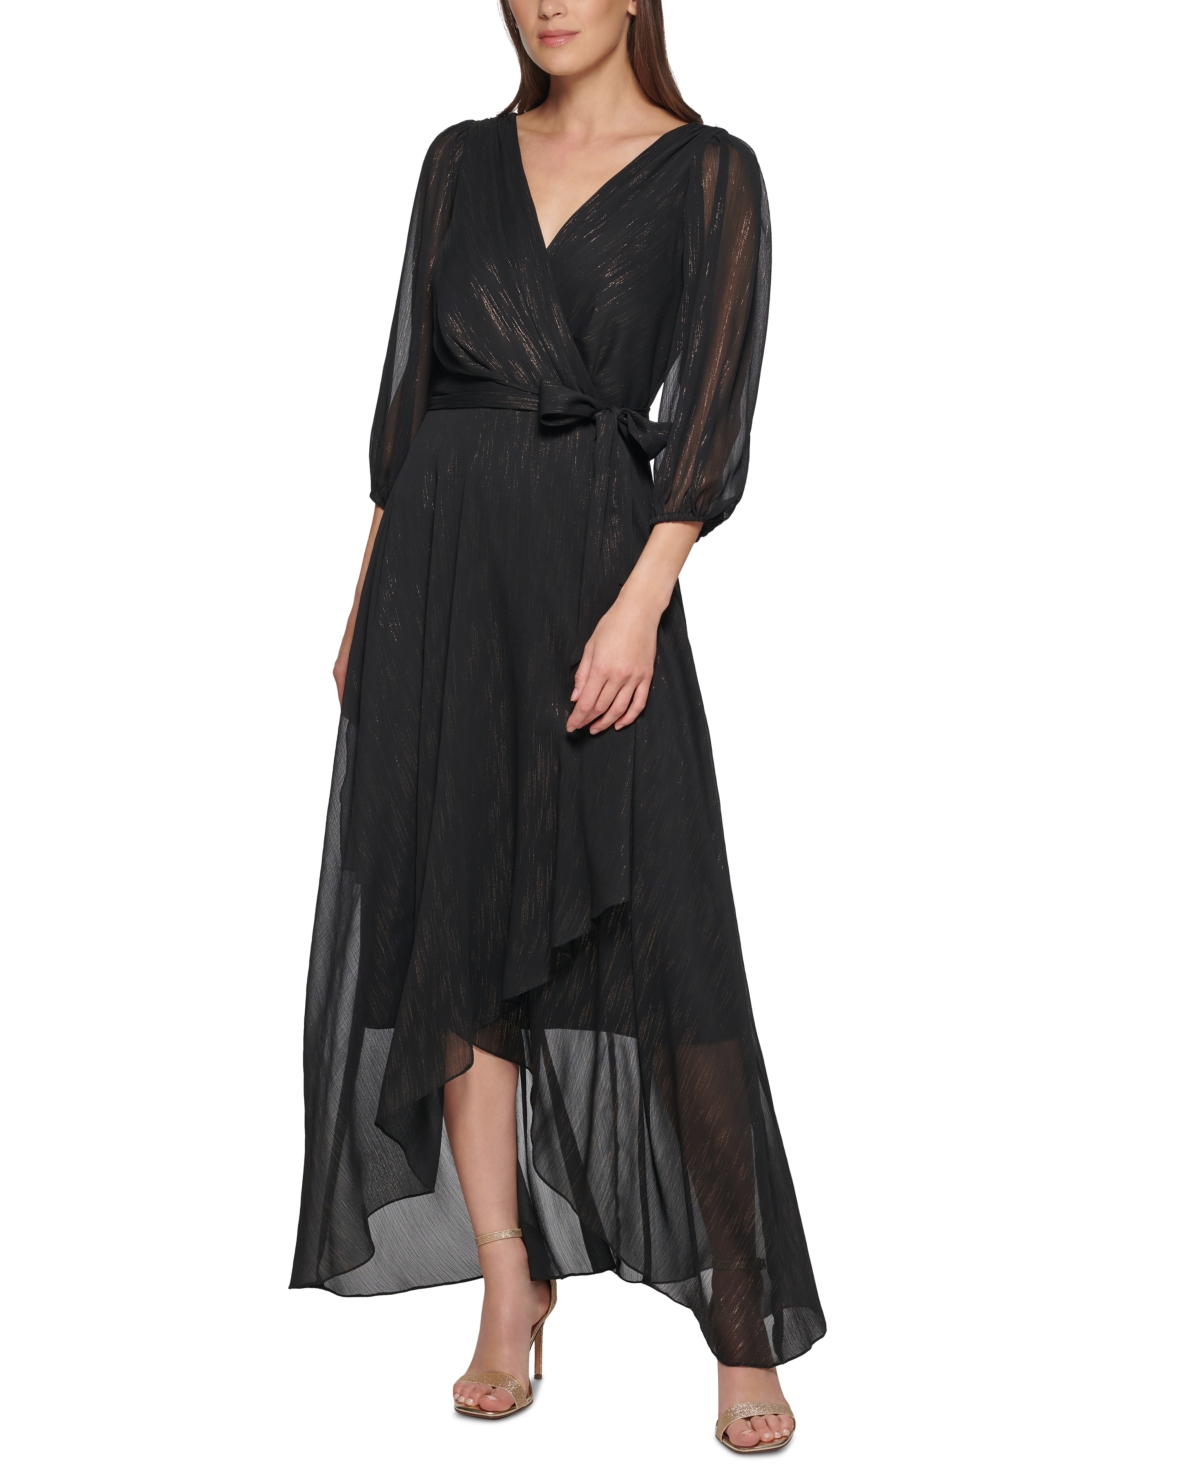 DKNY Gowns for Women | ModeSens